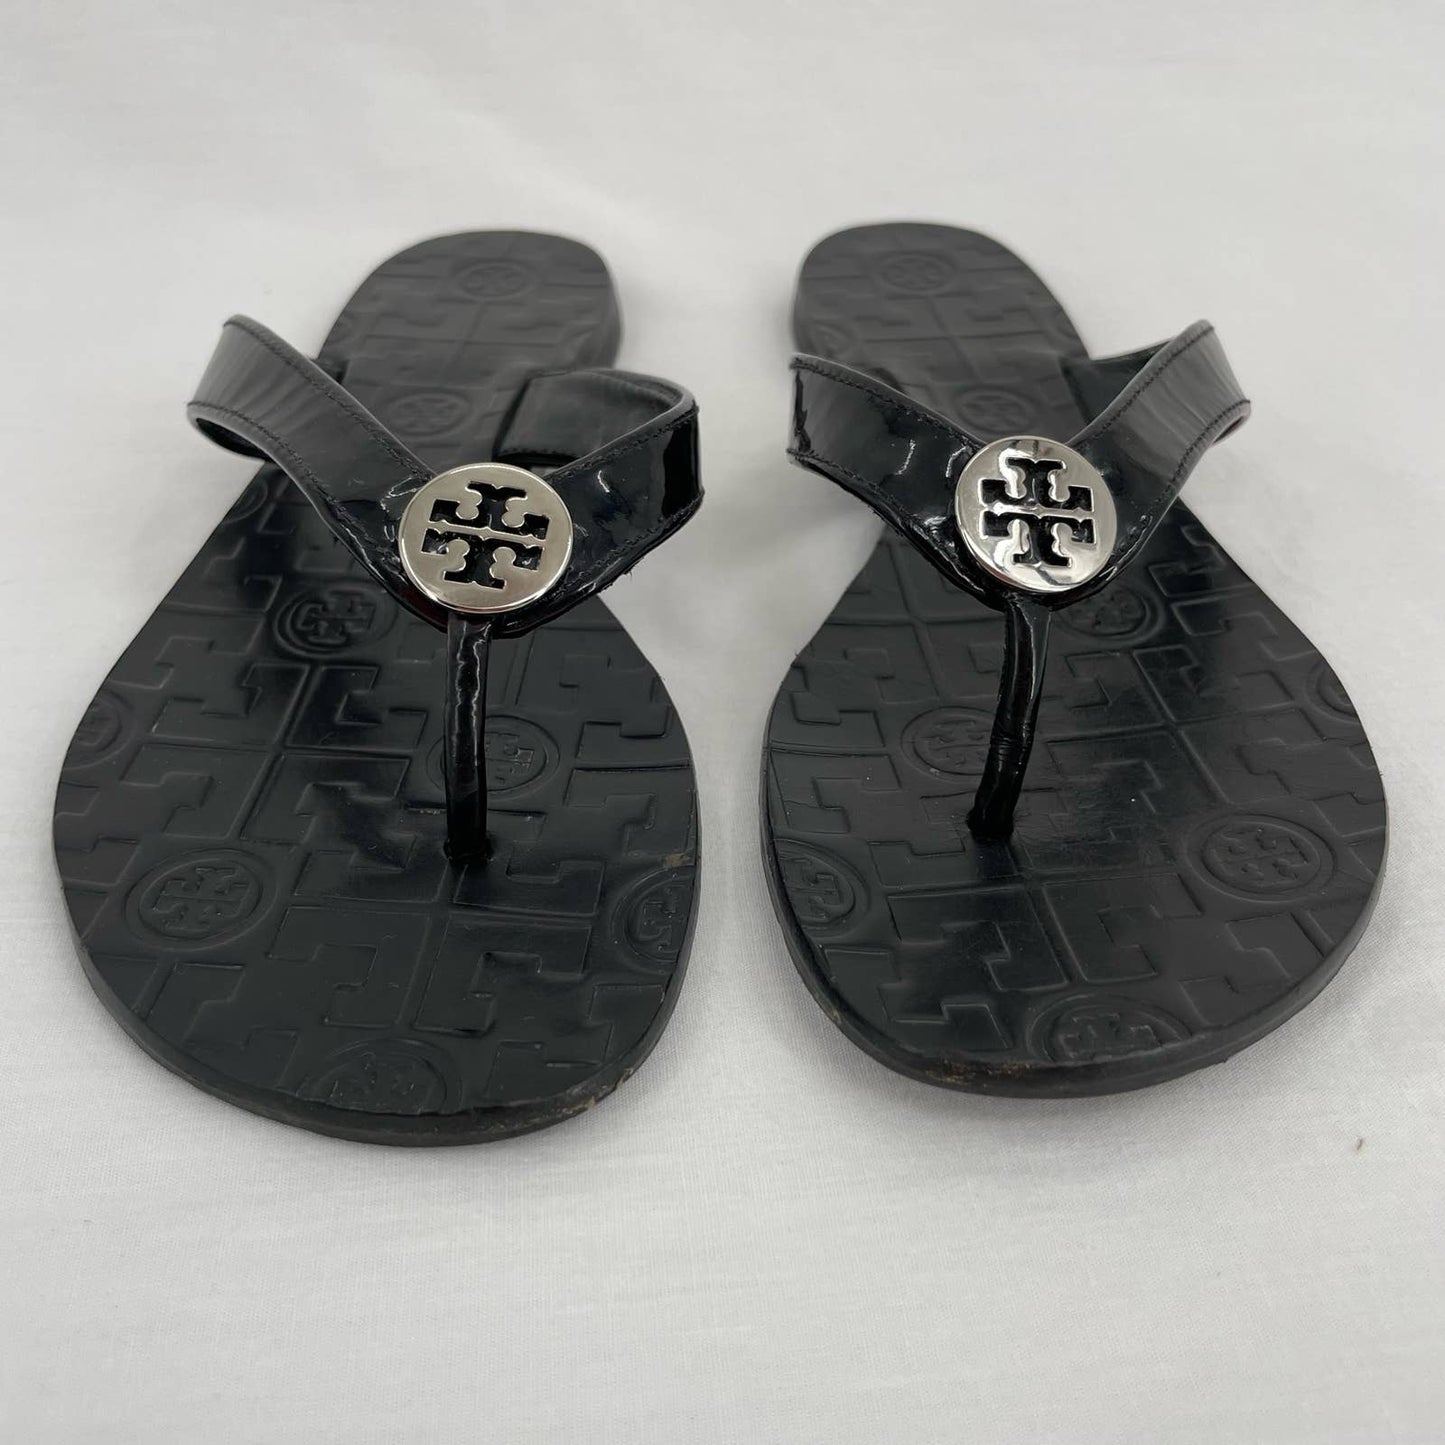 Tory Burch Thora Black Patent Leather Thong Sandals Metal Logo Medallion Size 7